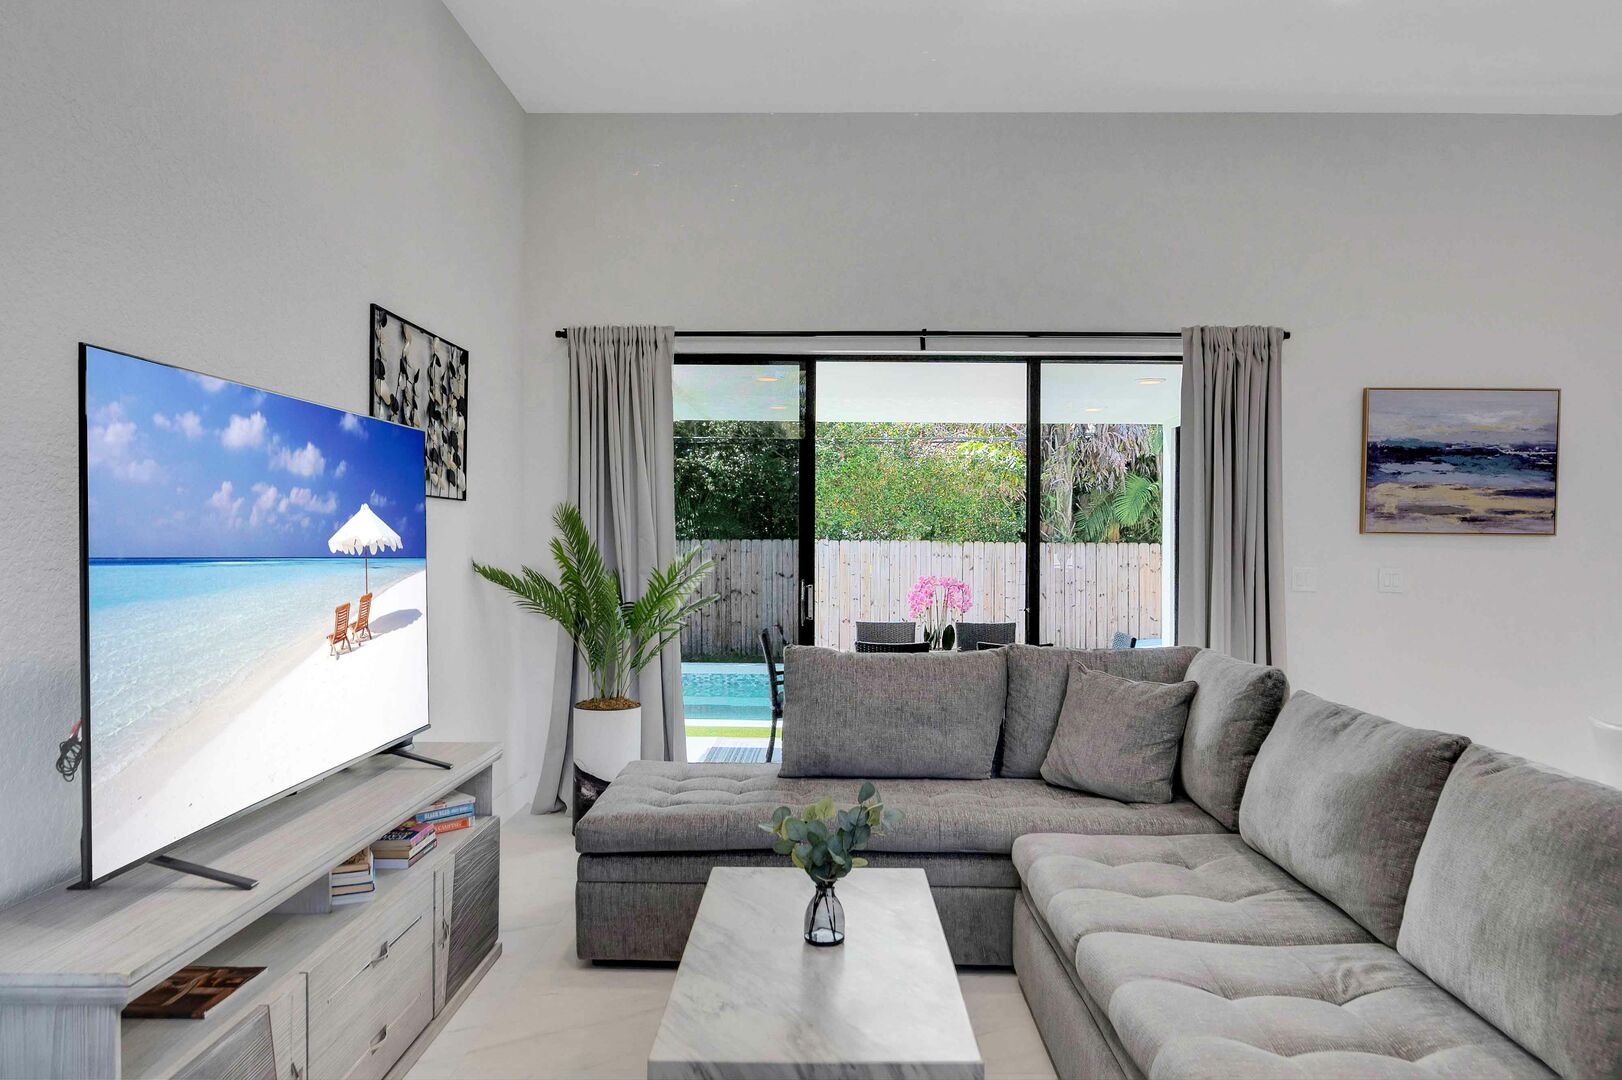 The living space features a comfortable lounge area and smart TV.